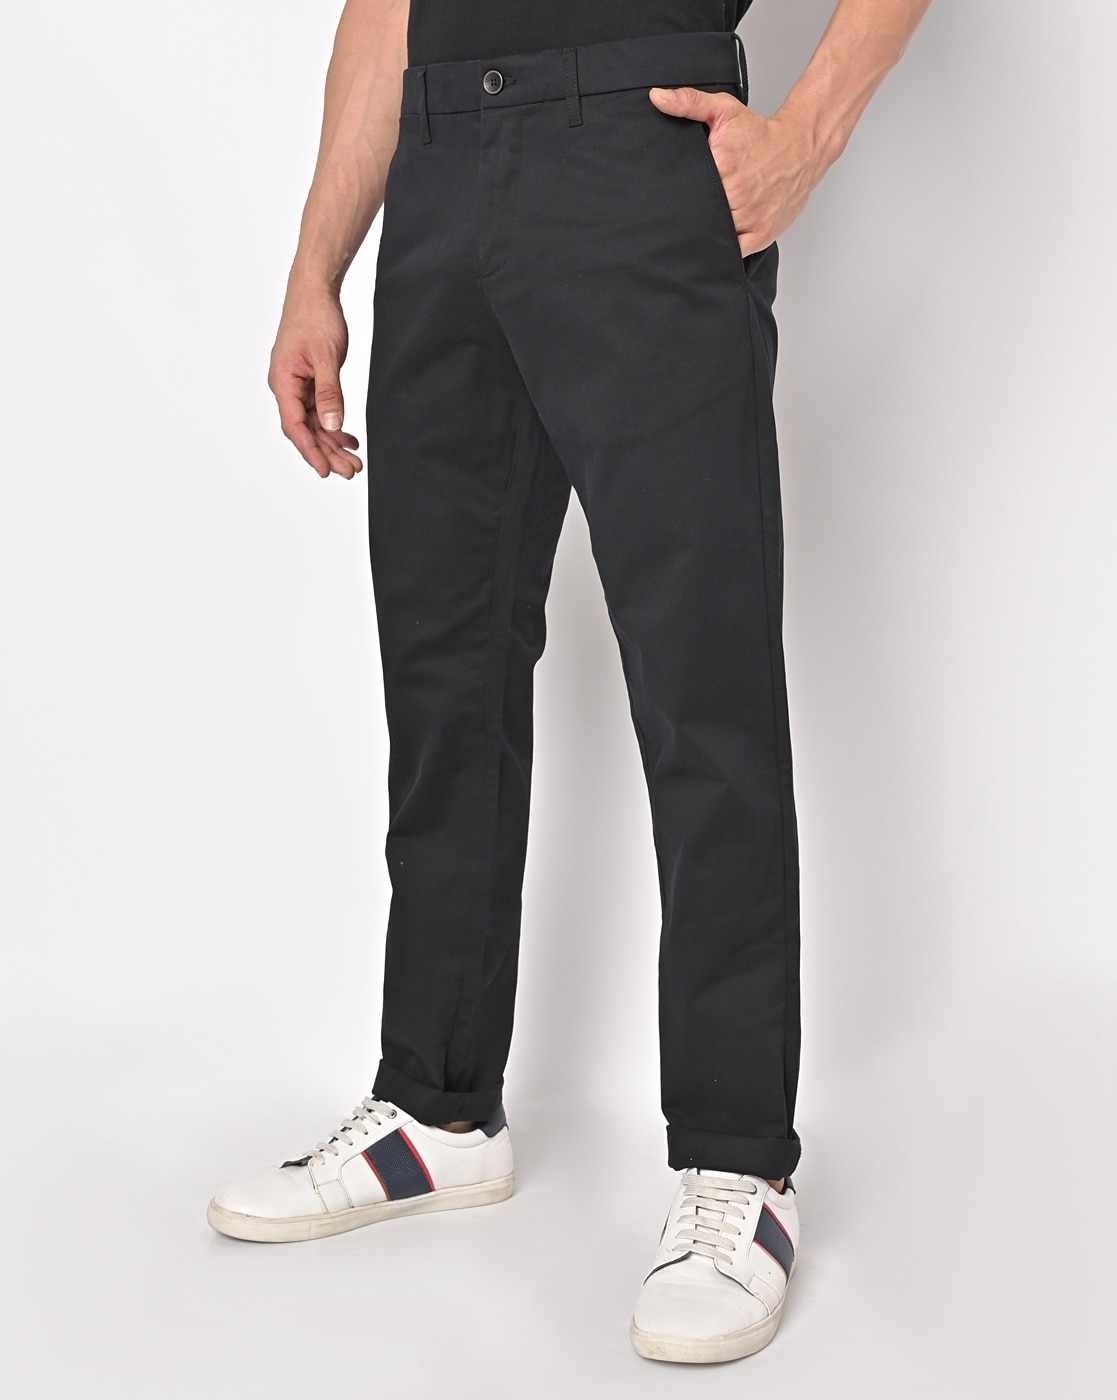 Boys Straight Fit Chino Pant - French Toast